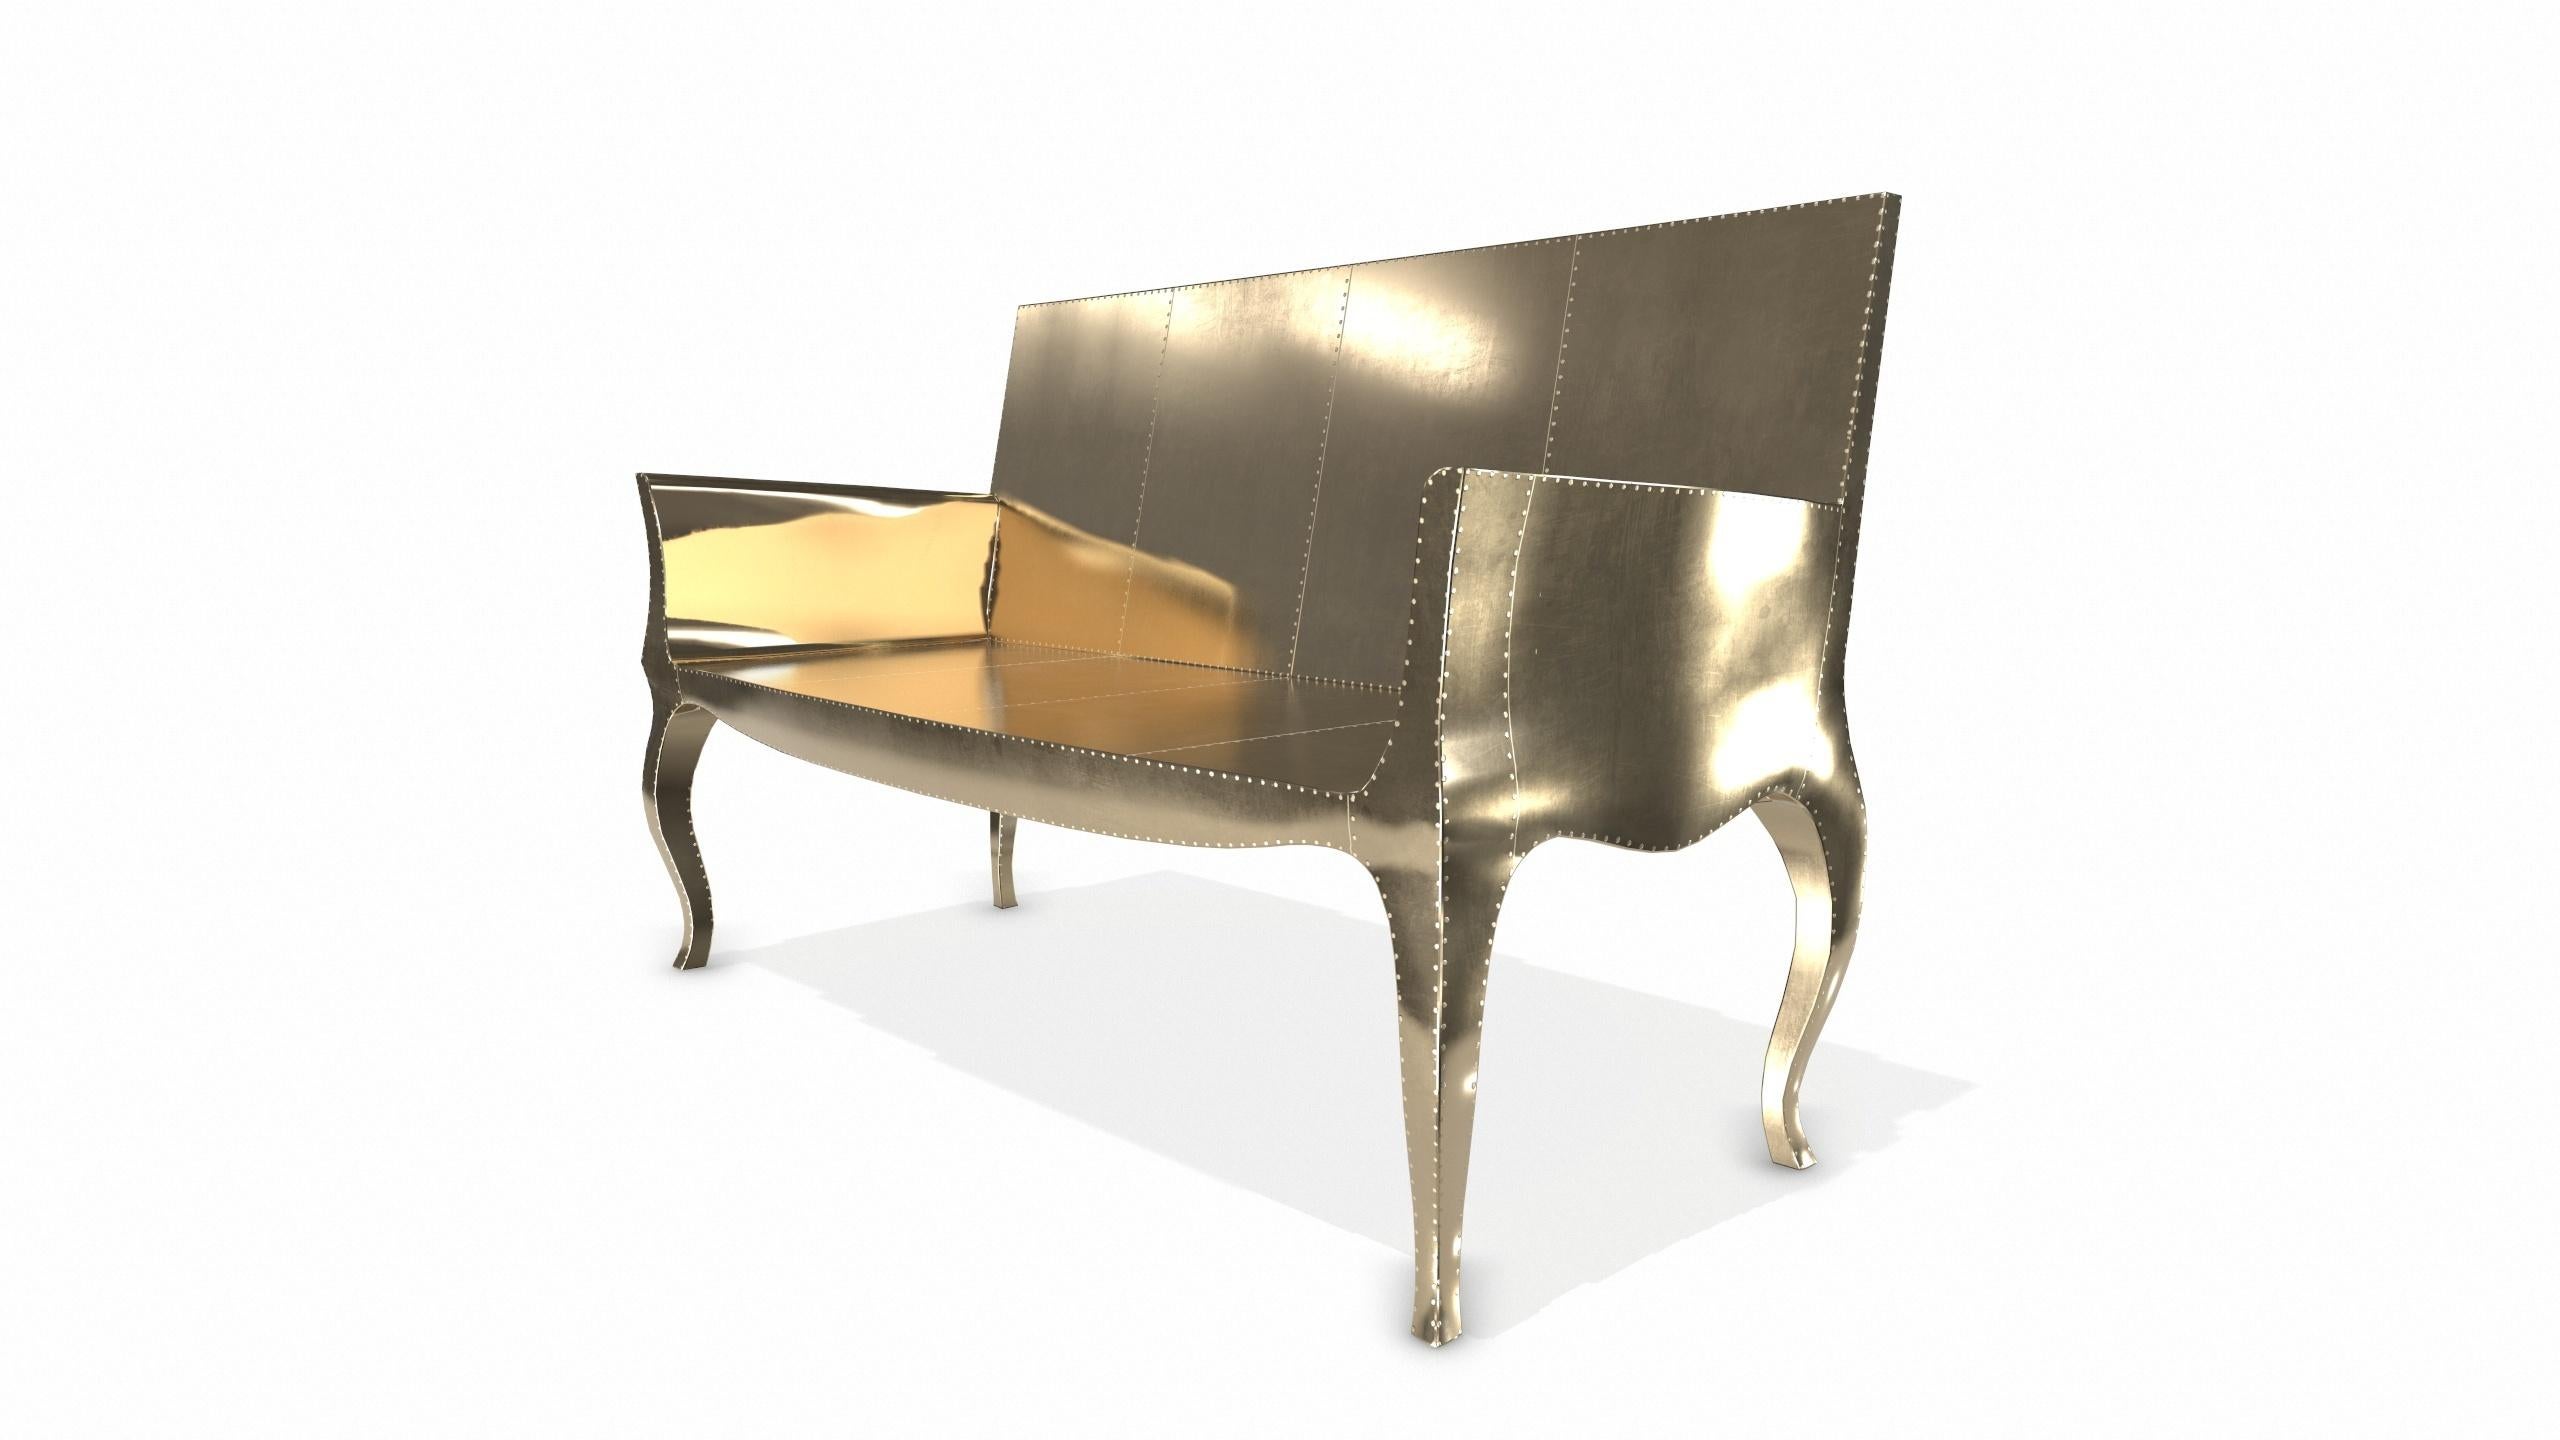 Hand-Crafted Louise Settee Art Deco Benches in Smooth Brass by Paul Mathieu for S Odegard For Sale